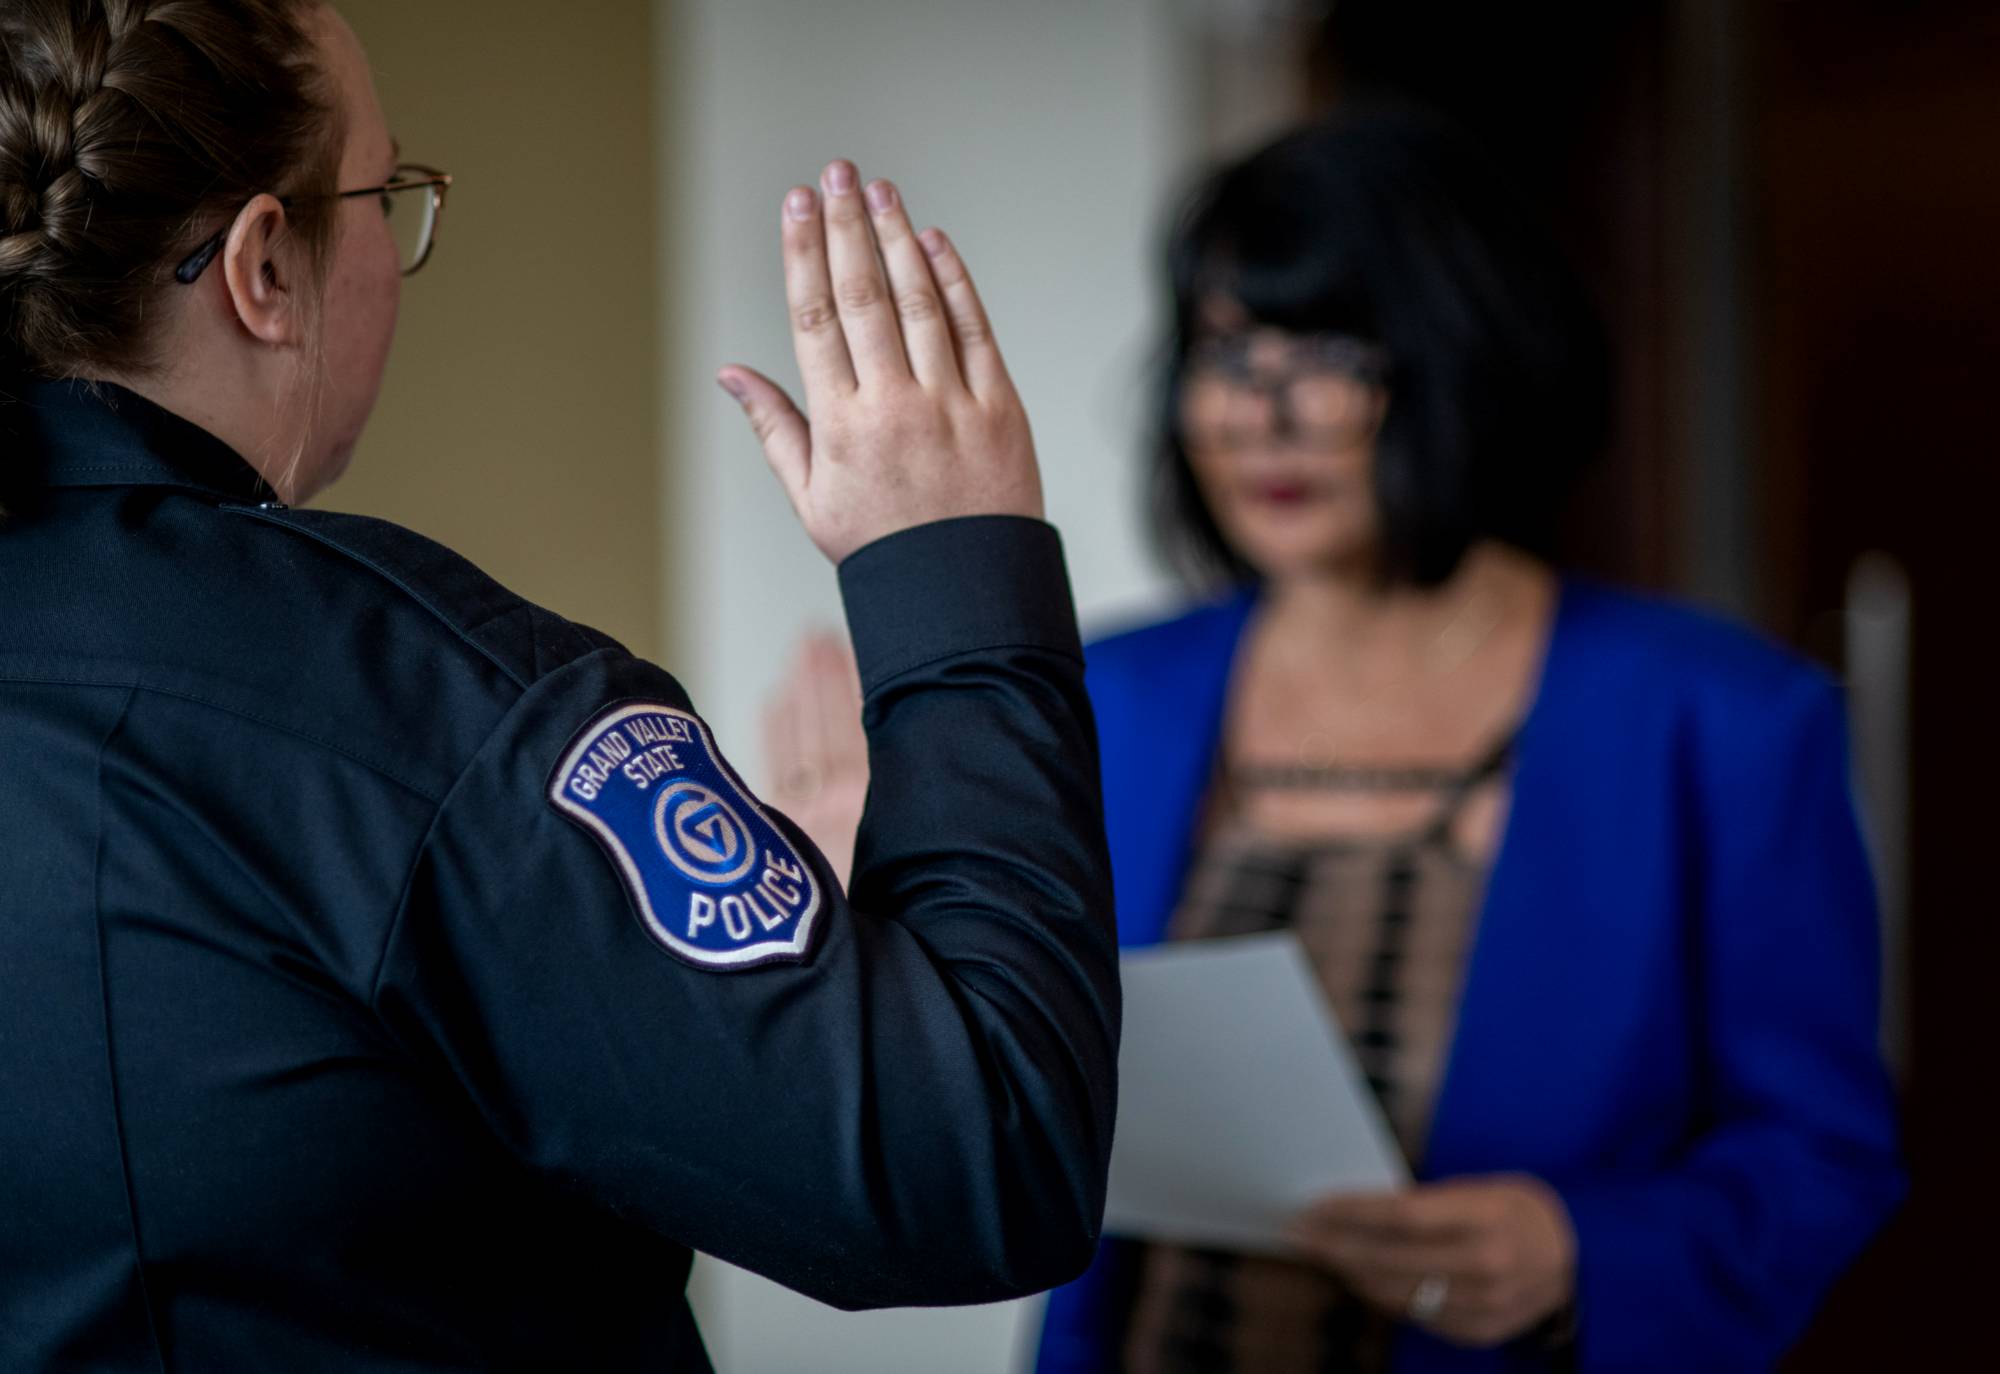 Female police officer raising right hand to swear to oath of office administered by President Mantella